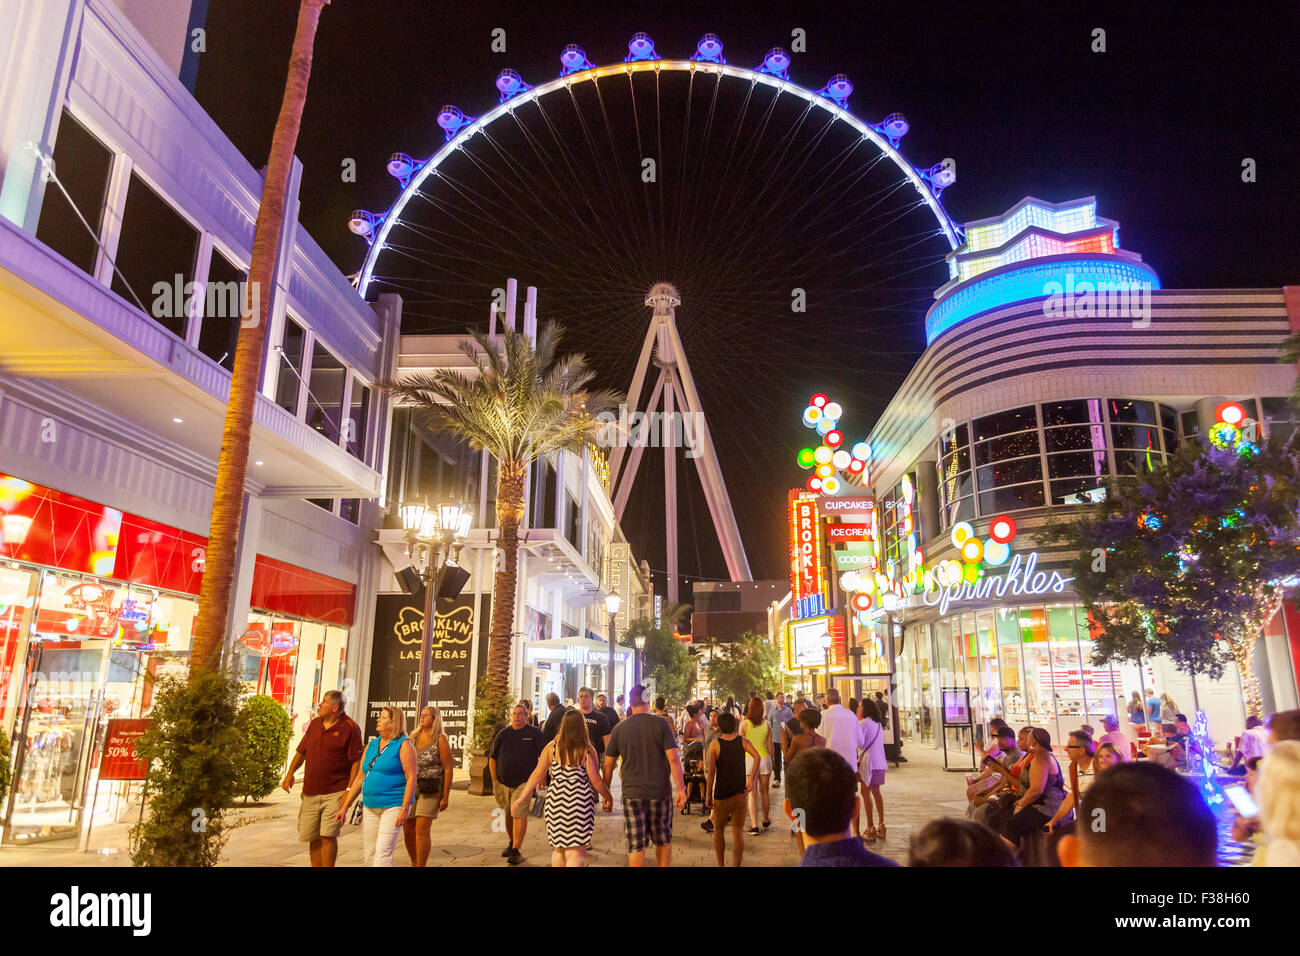 A nighttime view of the High Roller Ferris Wheel in Las Vegas, Nevada. Stock Photo